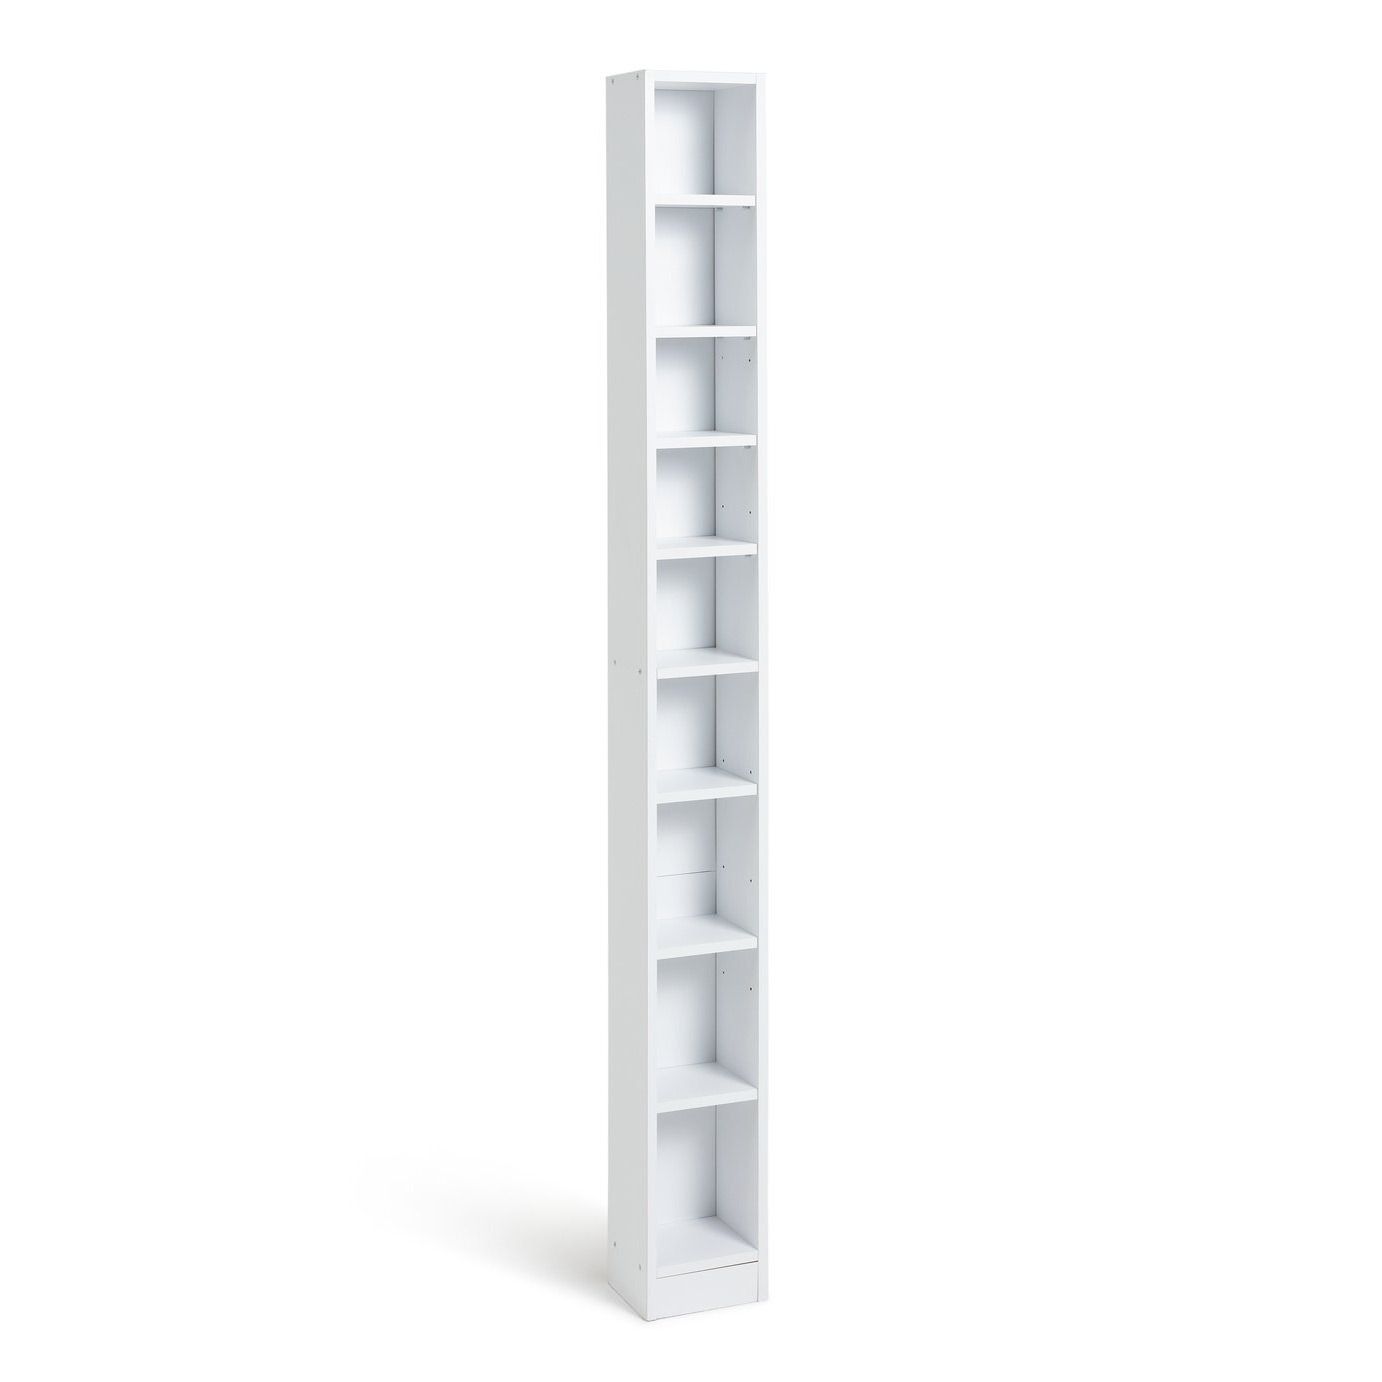 https://static.ufurnish.com/assets%2Fproduct-images%2Fargos%2F9328673%2Fargos-home-maine-tall-cd-and-dvd-storage-unit-white-ede723d6.jpg